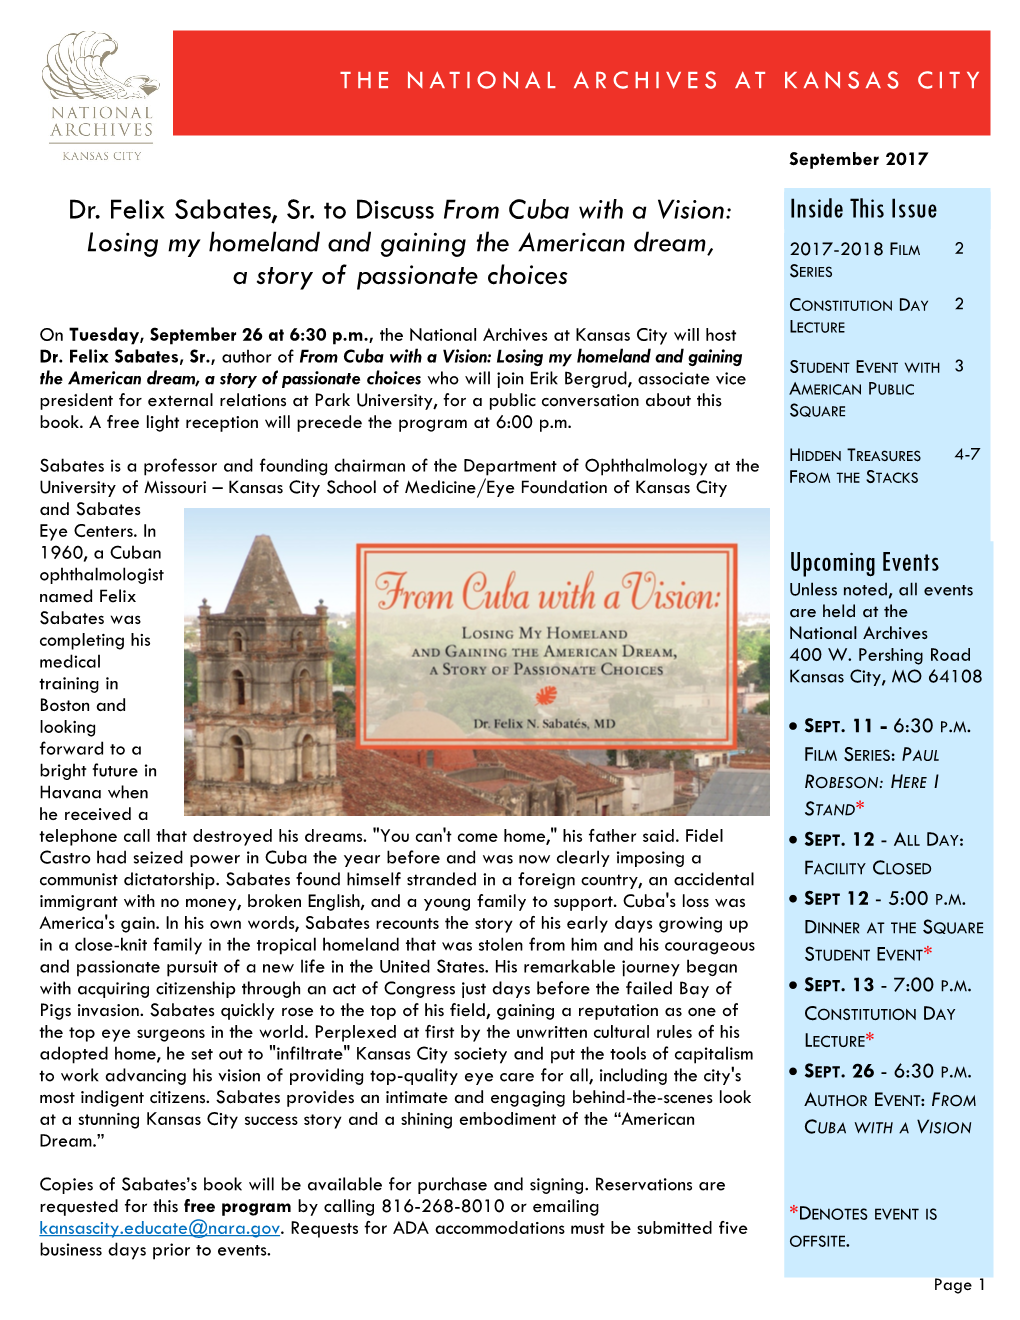 Dr. Felix Sabates, Sr. to Discuss from Cuba with a Vision: Inside This Issue